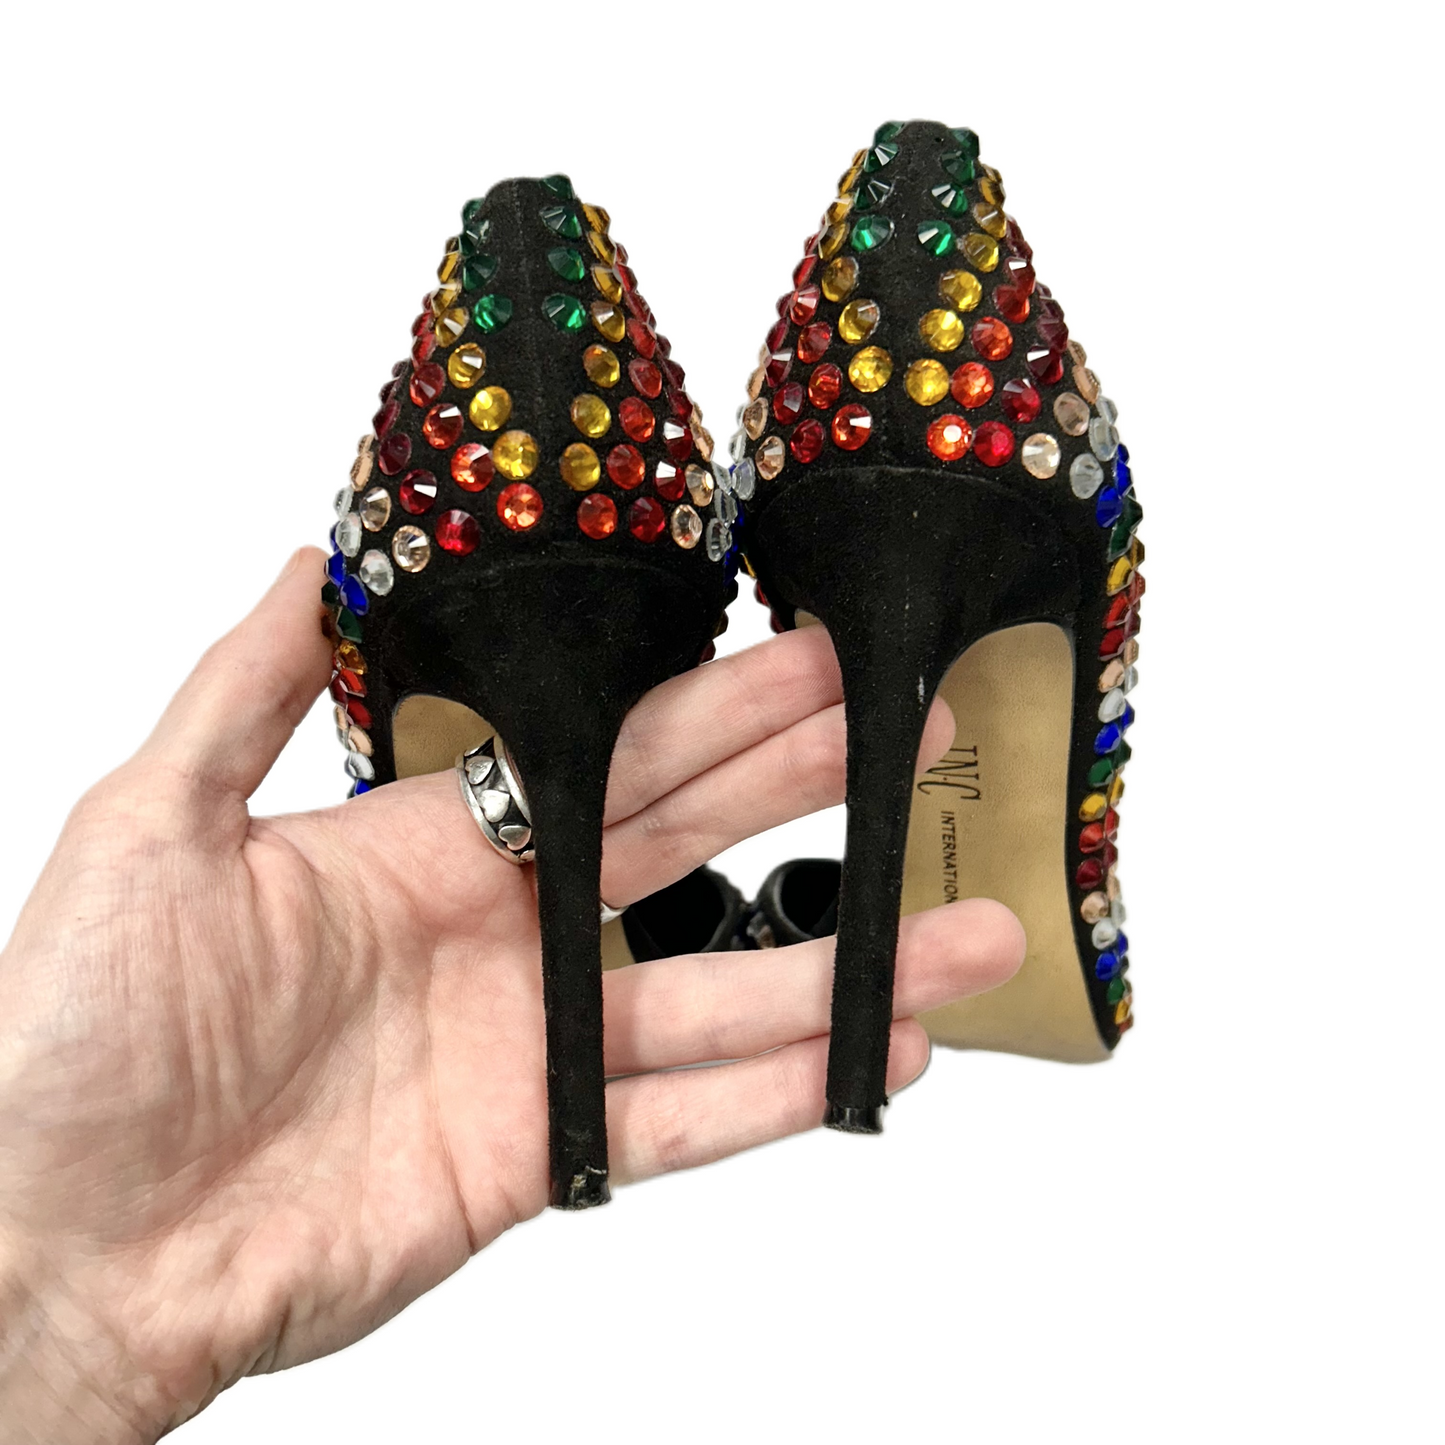 Rainbow Print Shoes Heels Stiletto By Inc, Size: 5.5